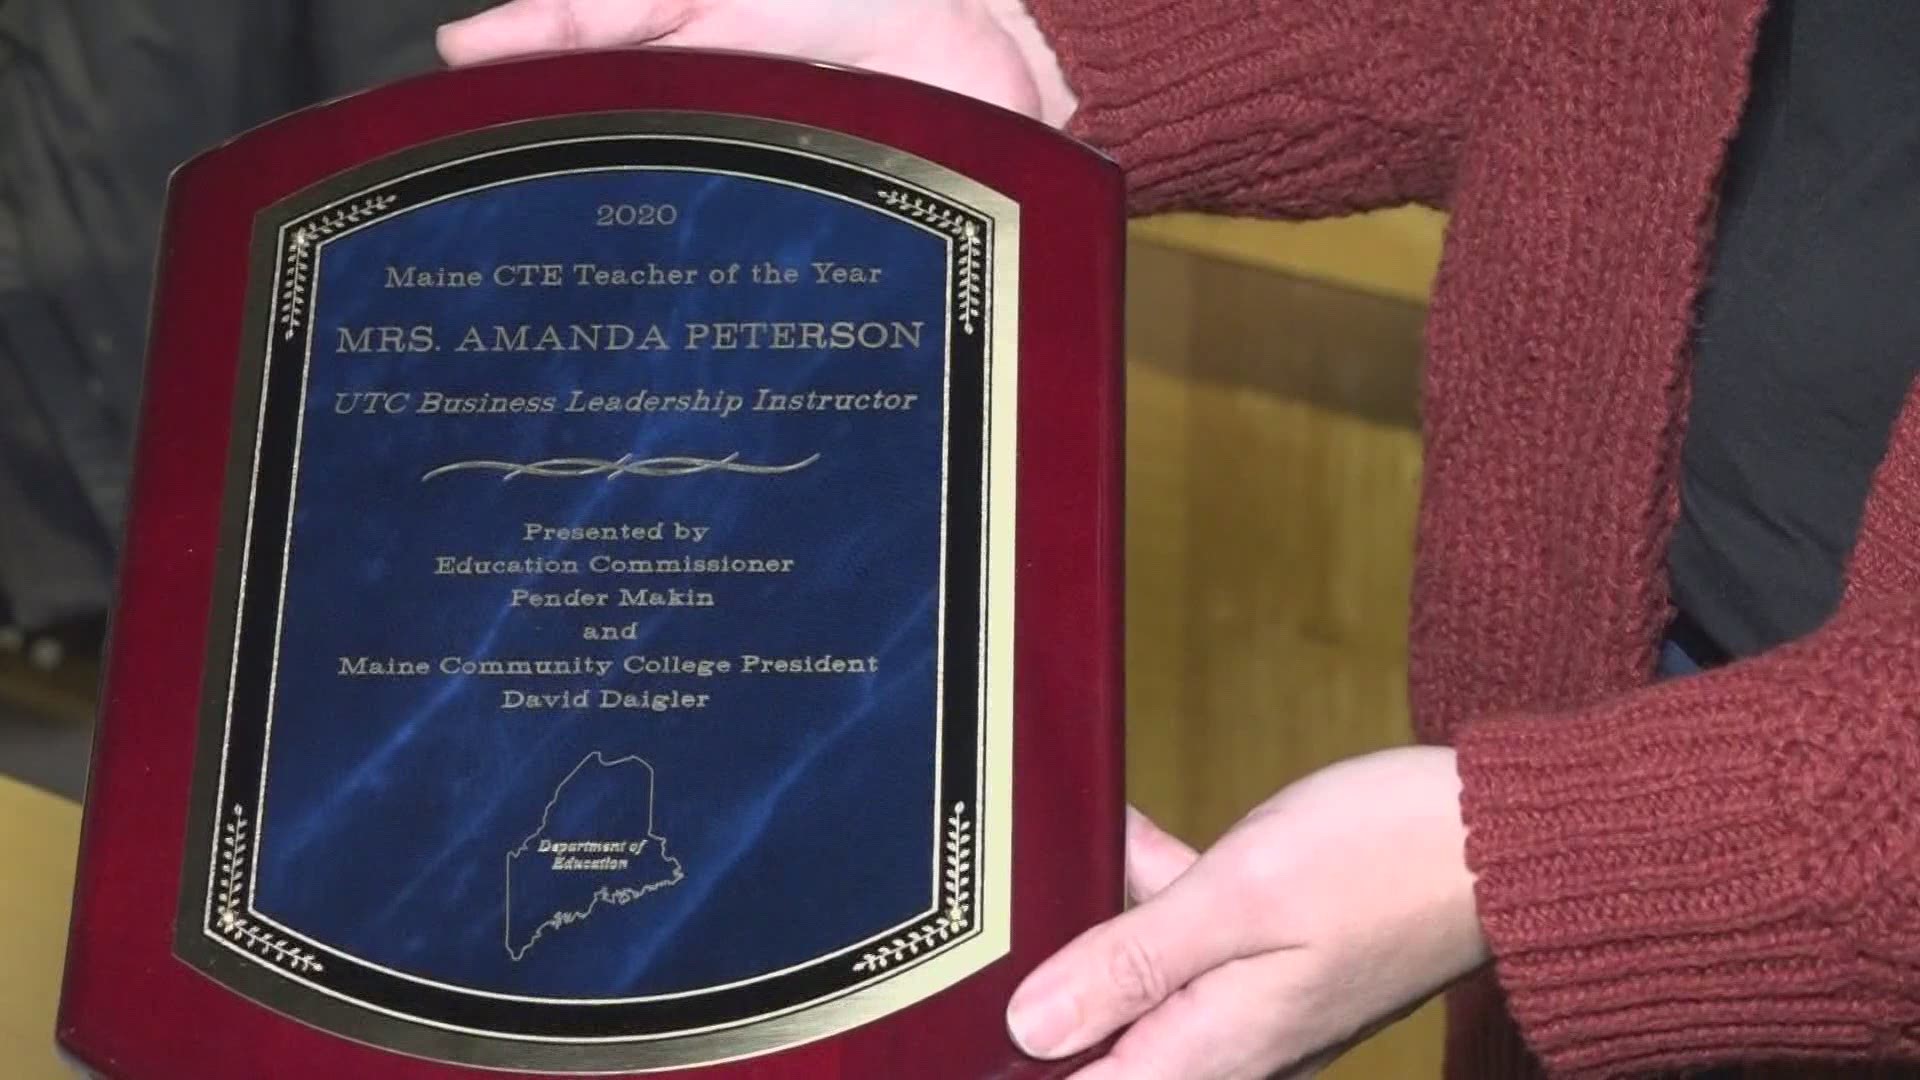 We all had that ONE teacher that made a serious difference in our lives! For many students in the Bangor area, that ONE teacher is Amanda Peterson.